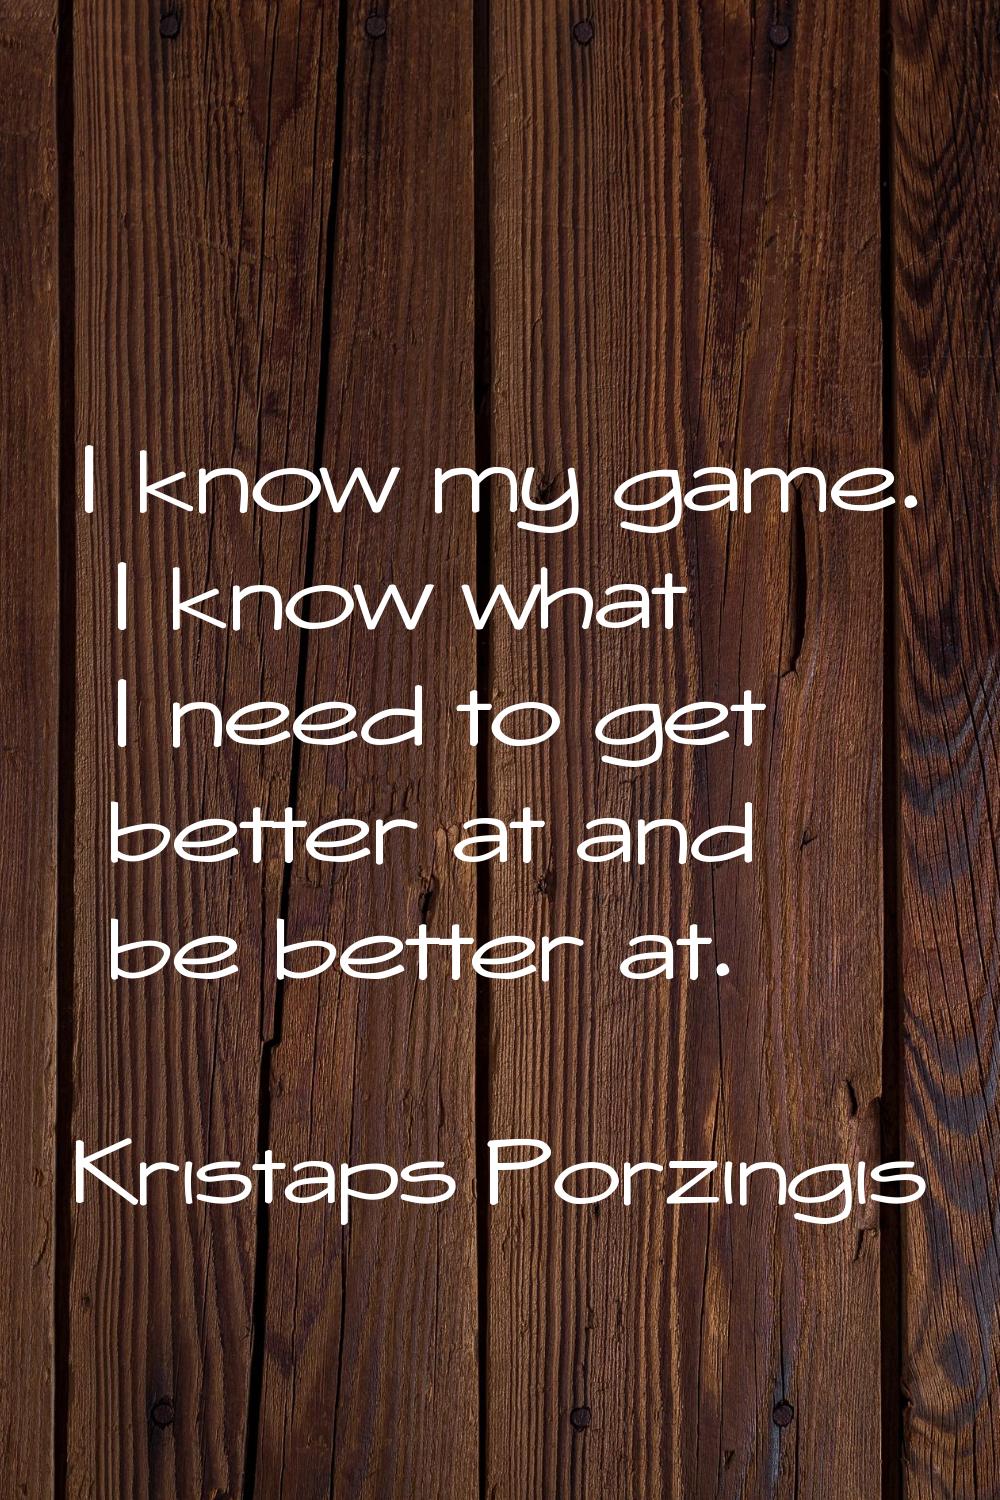 I know my game. I know what I need to get better at and be better at.